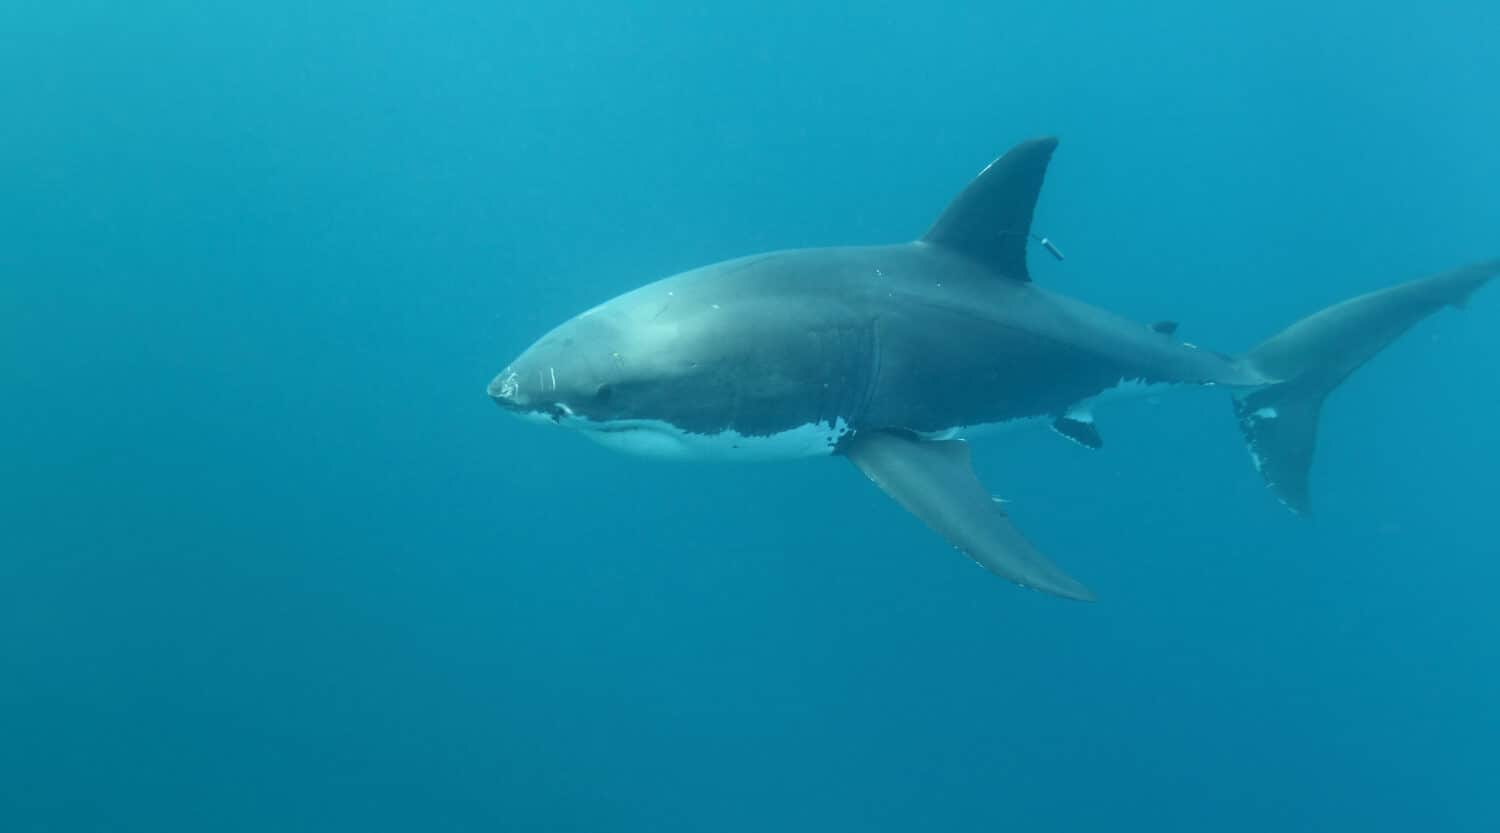 tagged great white shark, Carcharodon carcharias, swimming in the blue waters of the Neptune Islands, South Australia